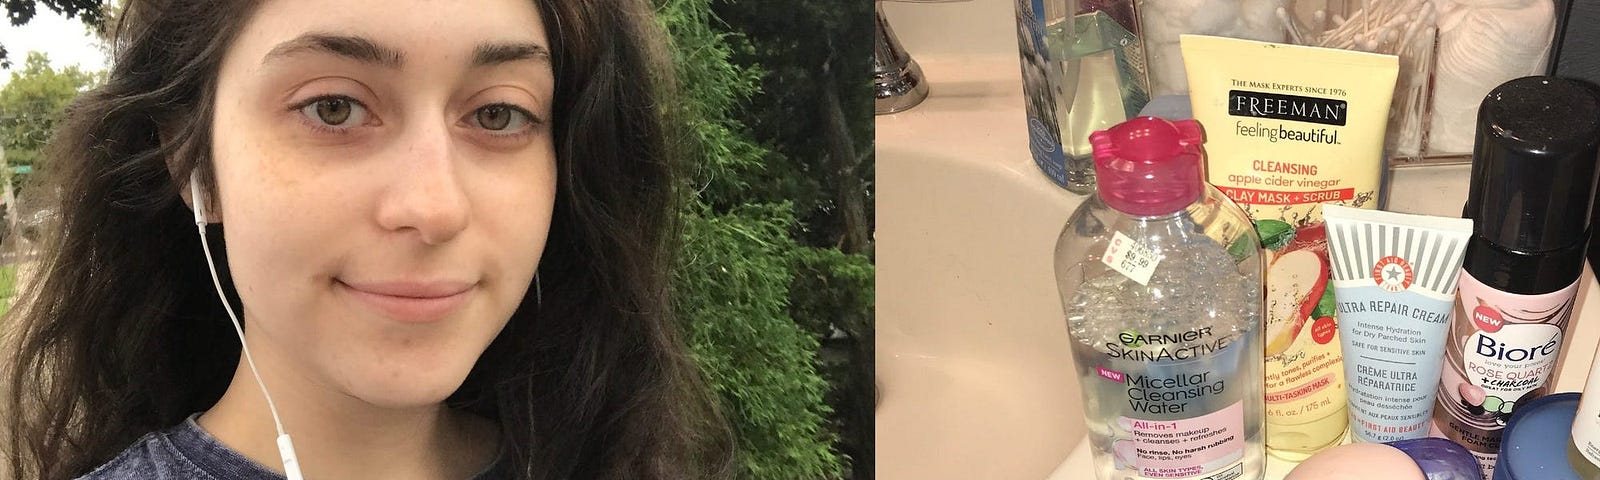 A side-by-side photo of the author (left) and her skincare products (right).